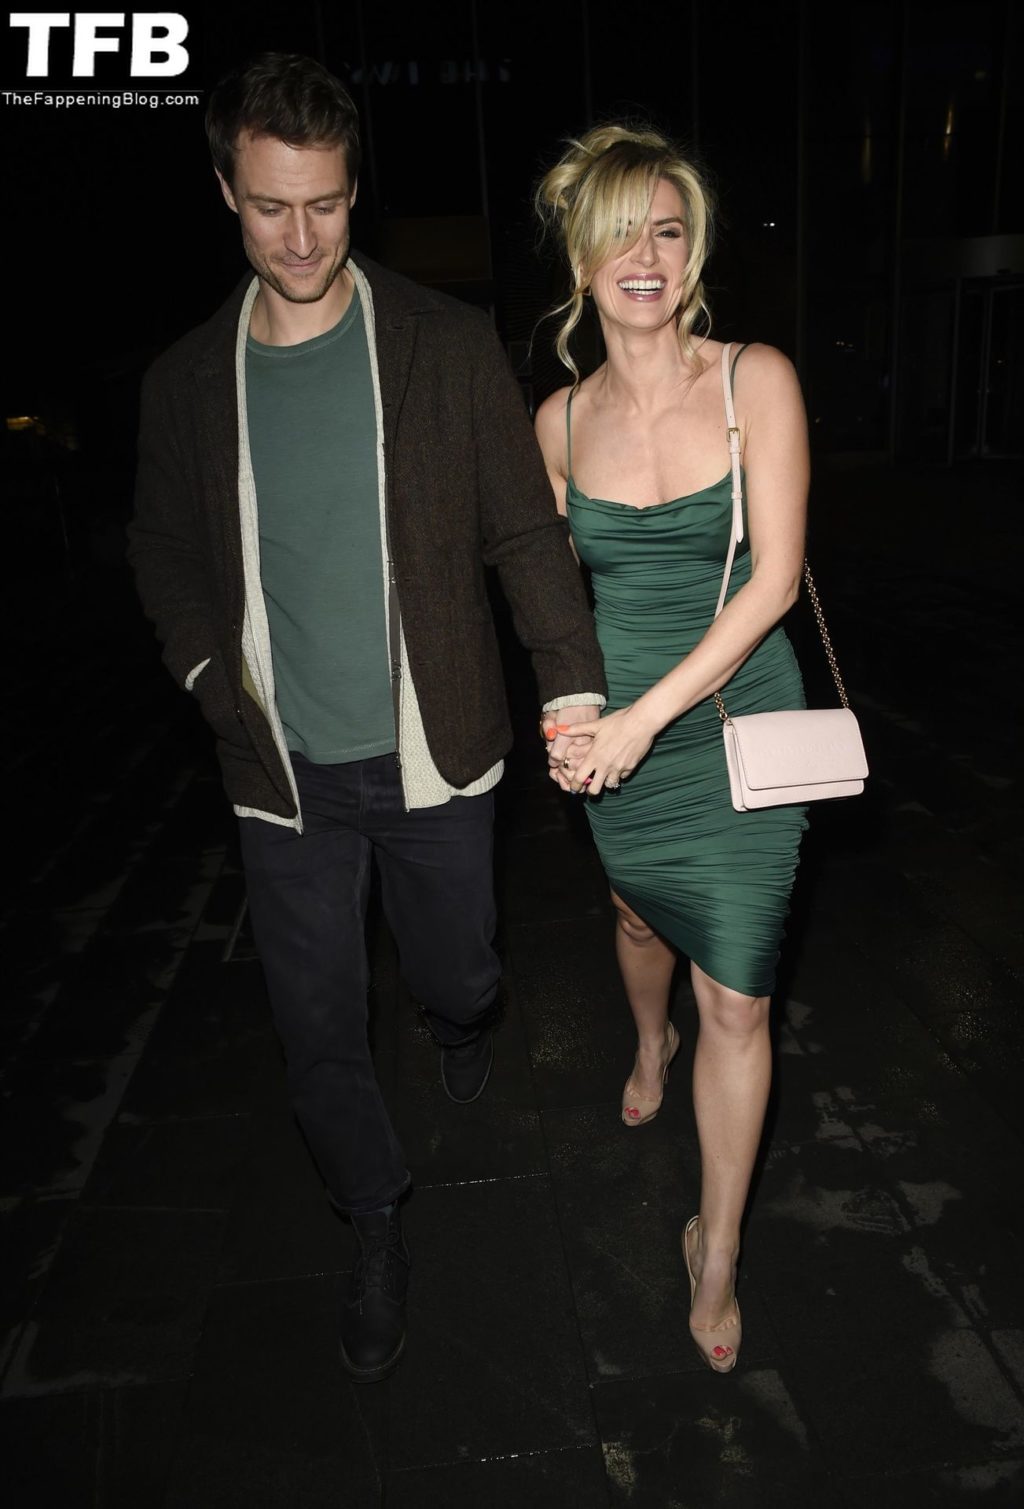 Sarah Jayne Dunn Sexy The Fappening Blog 6 1024x1509 - Sarah Jayne Dunn Looks Hot in a Green Dress Arriving at the Re-Launch of The Alchemist in Spinningfields (26 Photos)